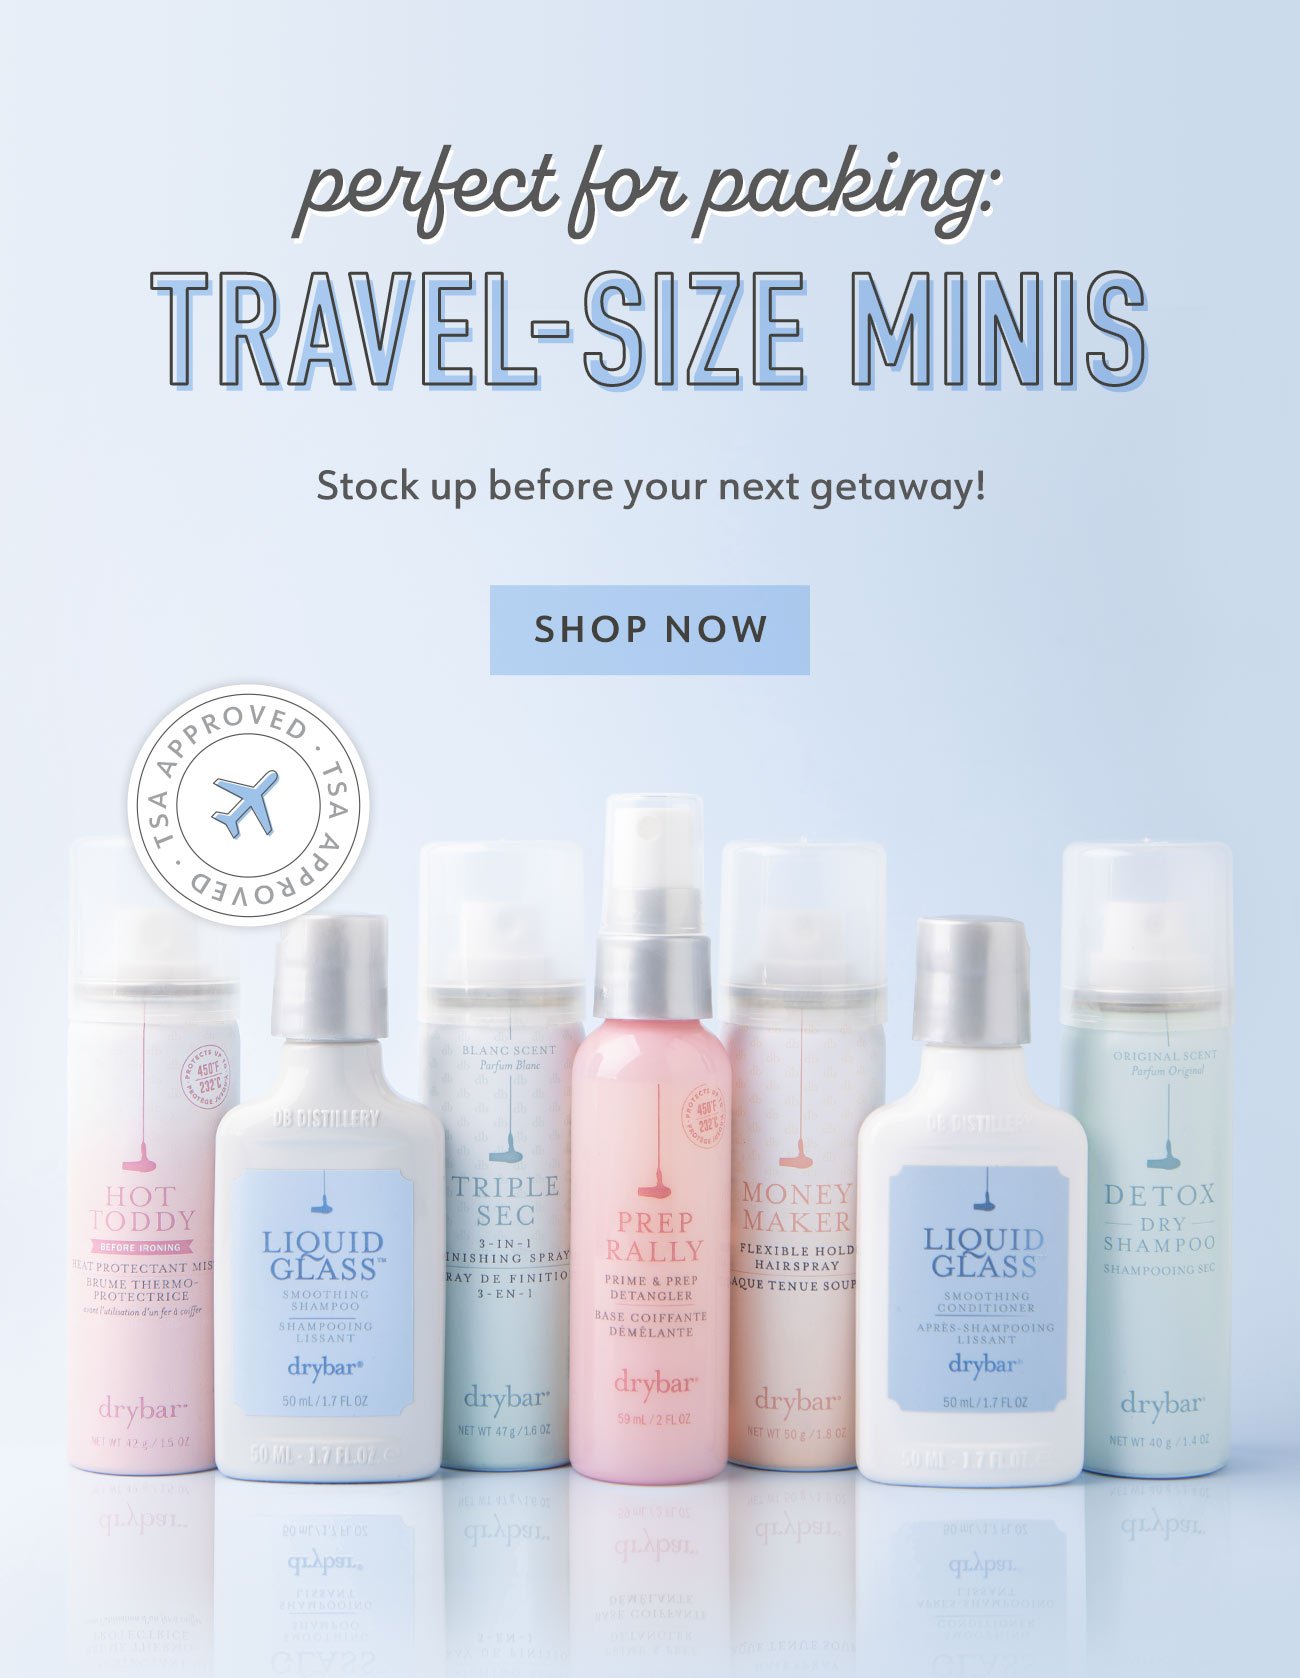 perfect for packing: travel-size minis